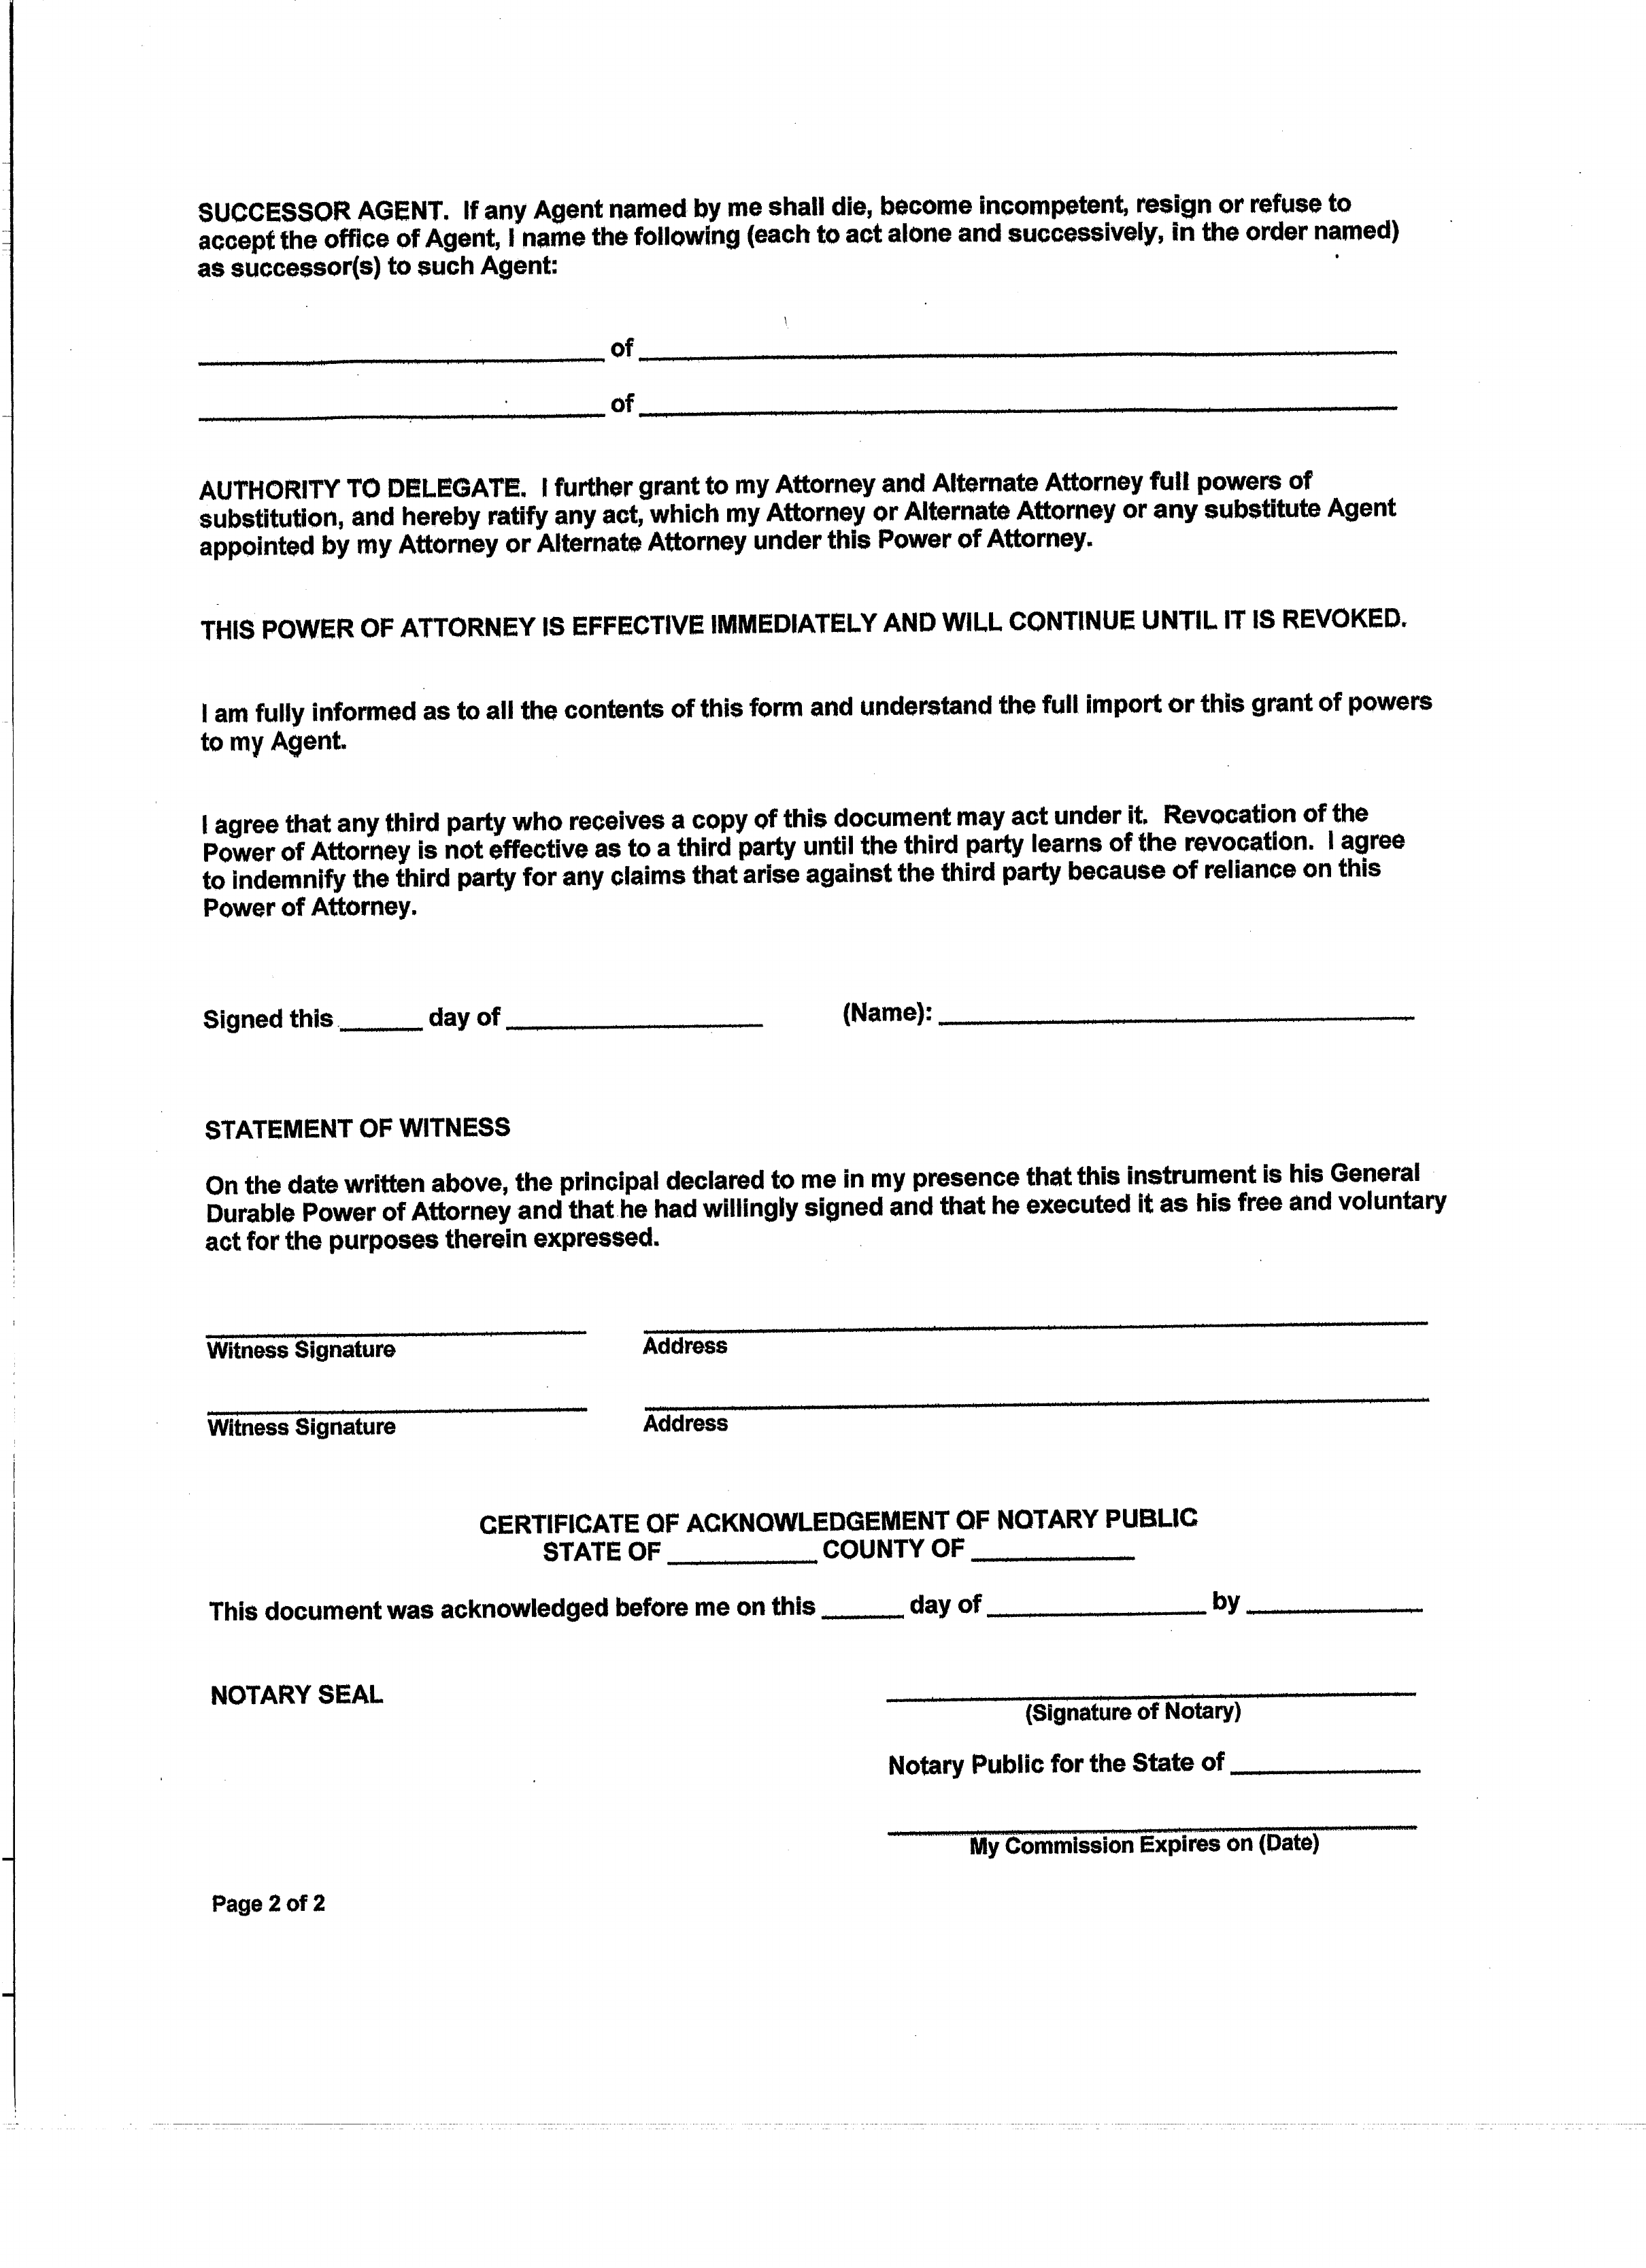 free-printable-durable-power-of-attorney-form-for-georgia-printable-forms-free-online